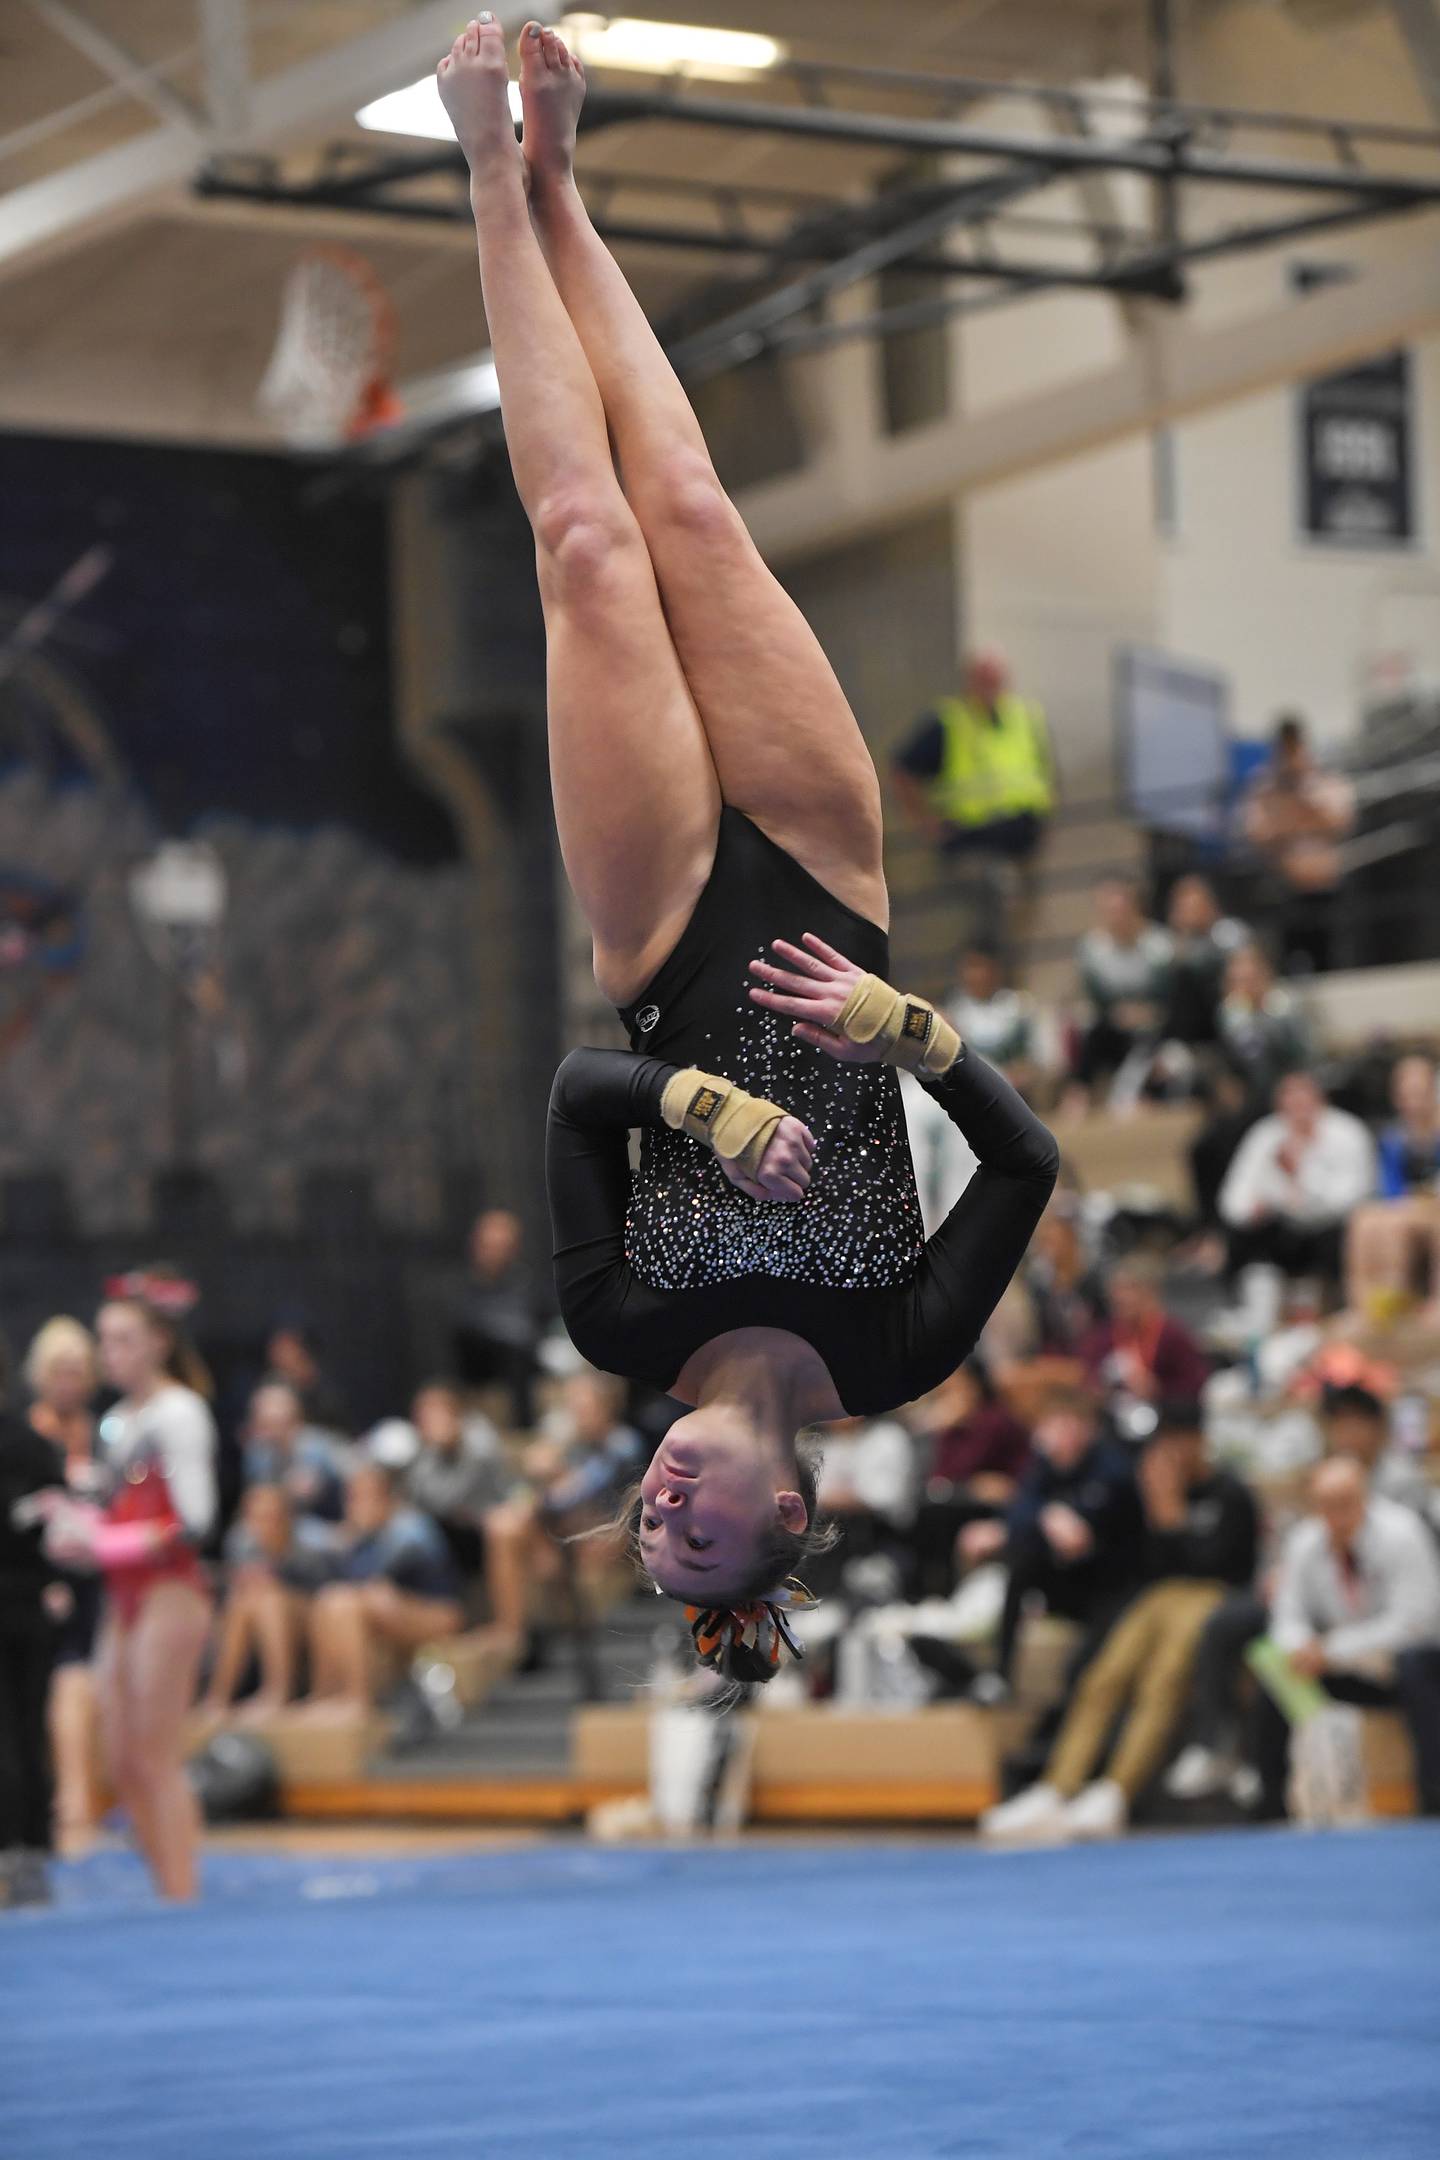 DeKalb’s Molly Kuntzi performs her floor exercise routine at the Lake Park girls gymnastics sectional meet in Roselle on Monday, February 6, 2023.